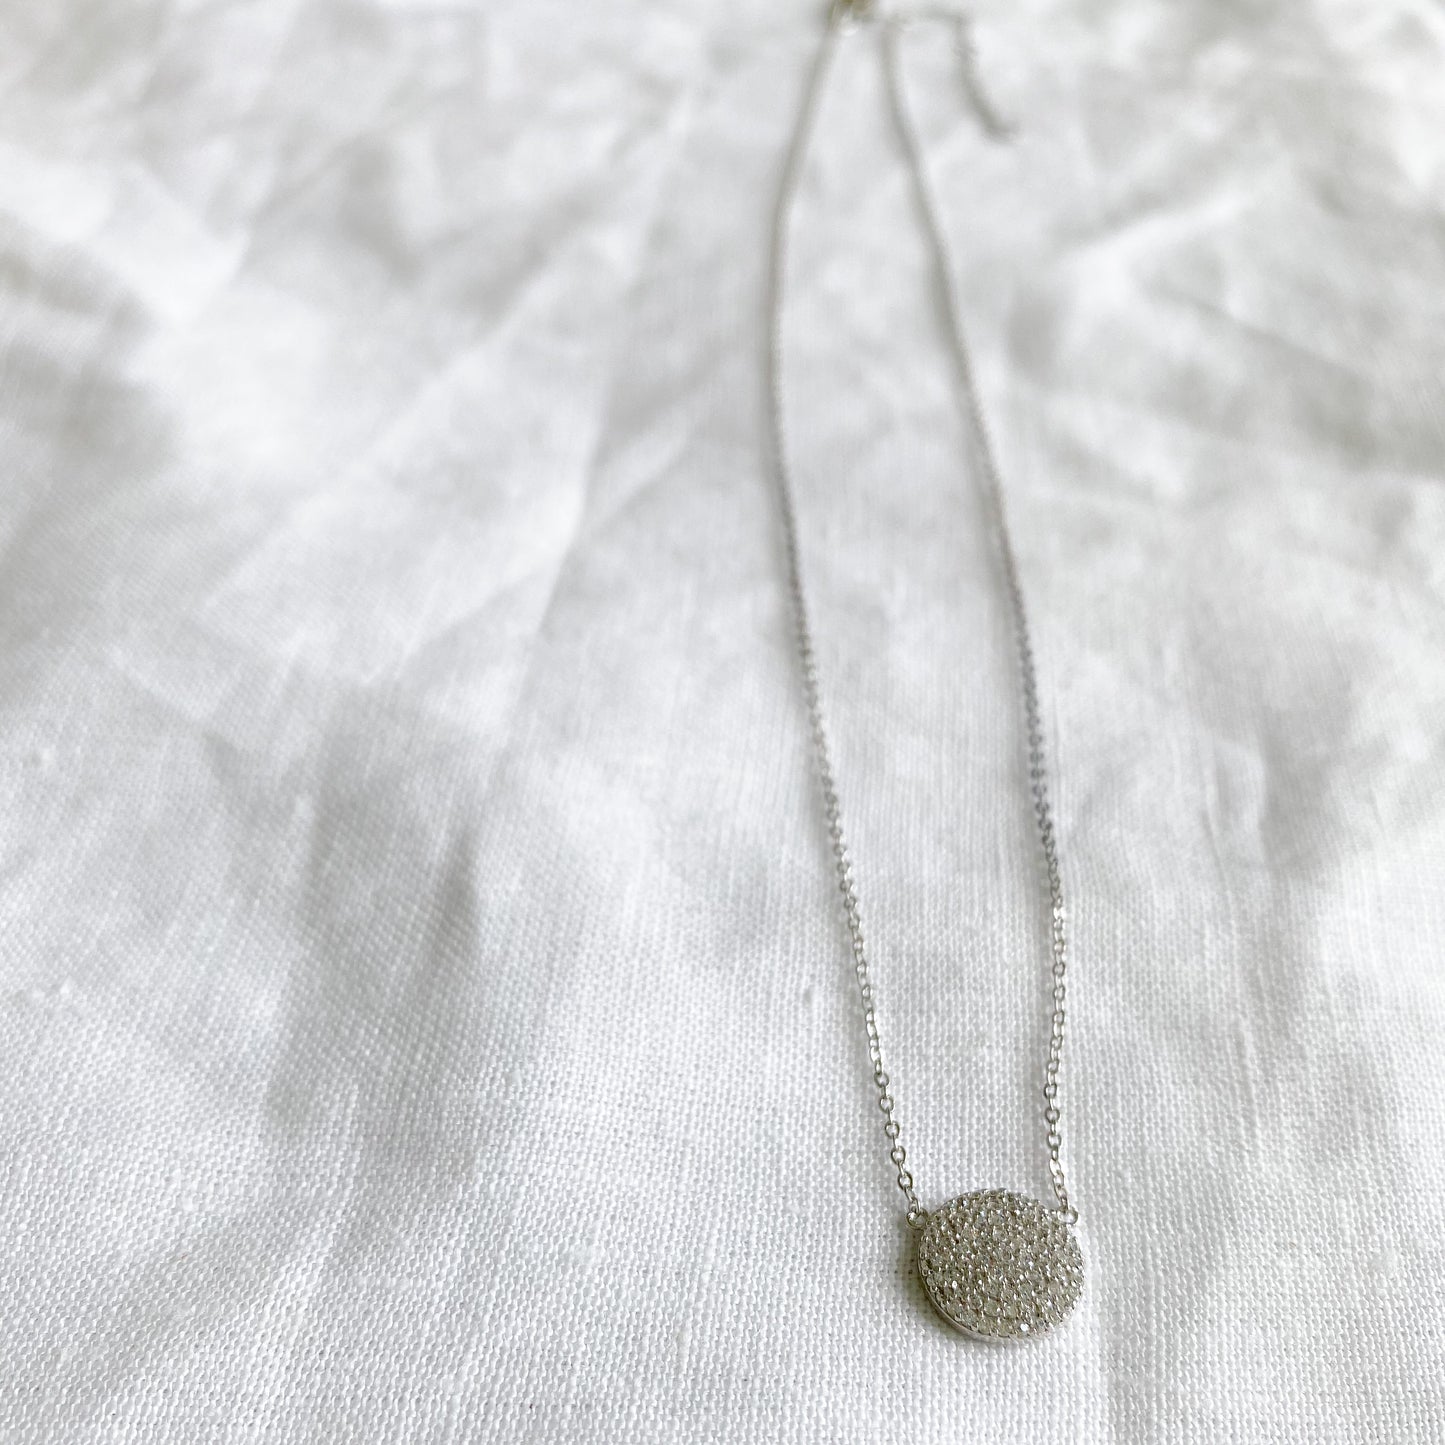 One World Necklace - BelleStyle